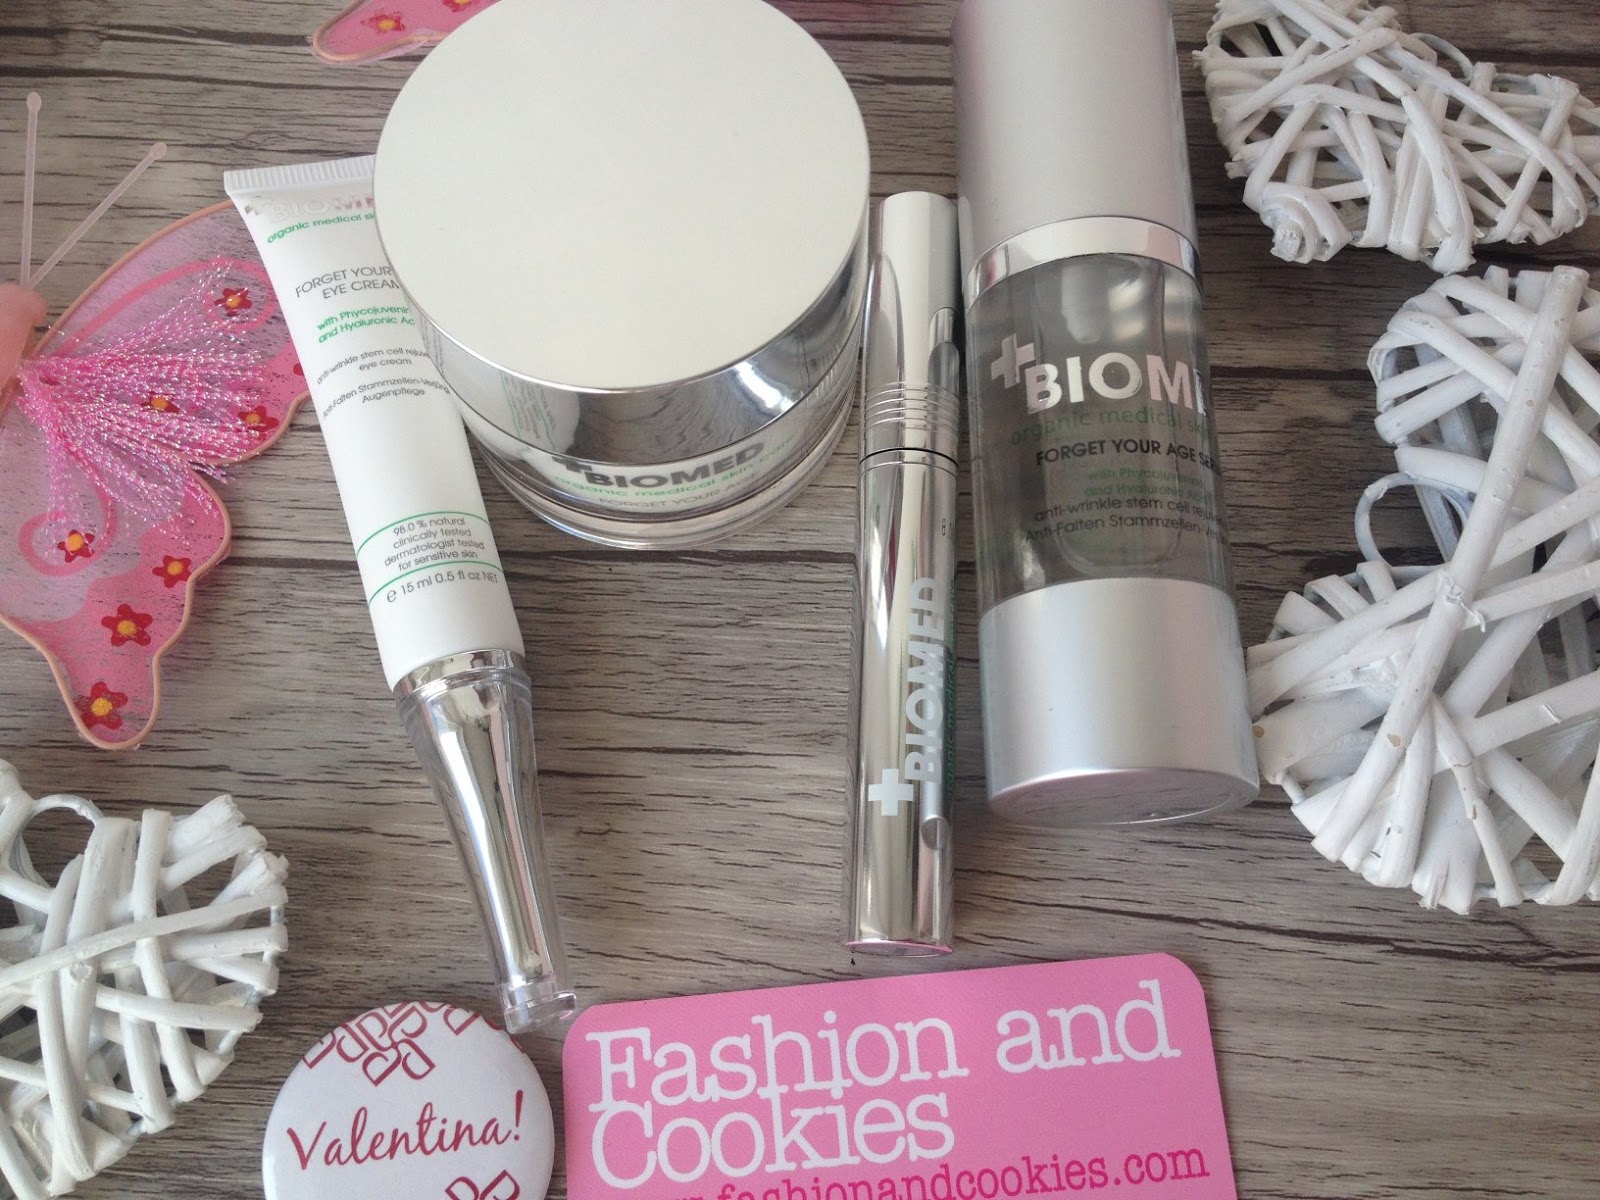 Biomed Organic Skincare review, Biomed Forget your age cream and serum presentation and review on Fashion and Cookies fashion blog